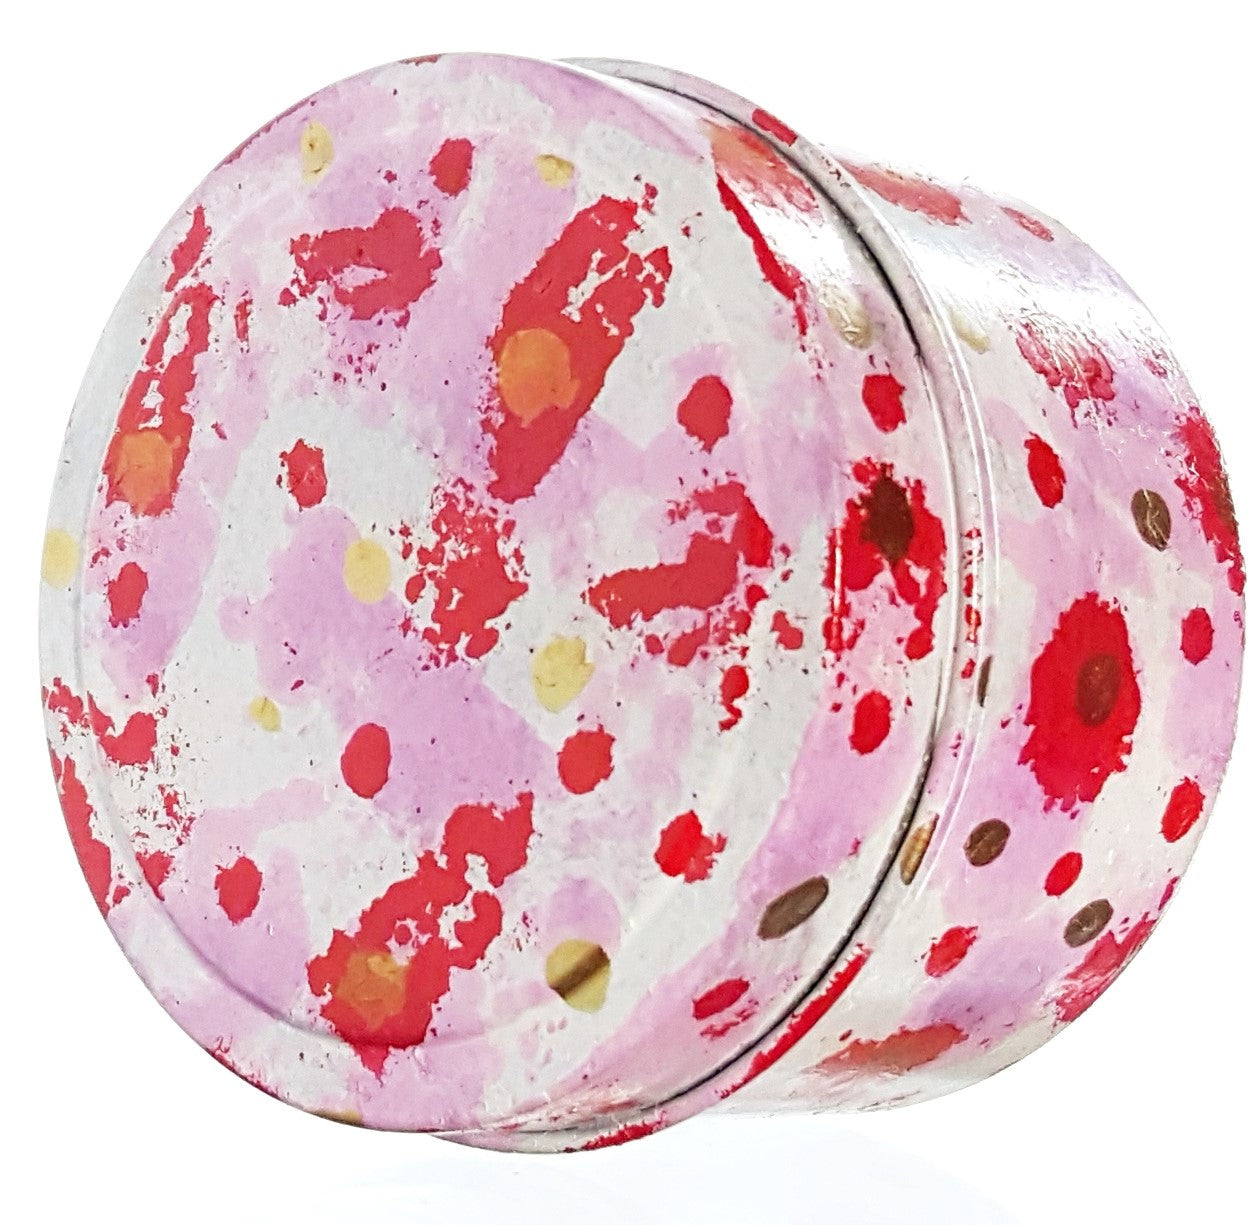 Buy Blossom to Bath Fresh Cut Roses Handpainted Soy Wax Candle from Flowersong Soap Studio.  Enjoy one of a kind décor and fill the air with a charming fragrance that lasts for hours  A true rose fragrance, the scent captures the splendor of a newly blossomed rose.